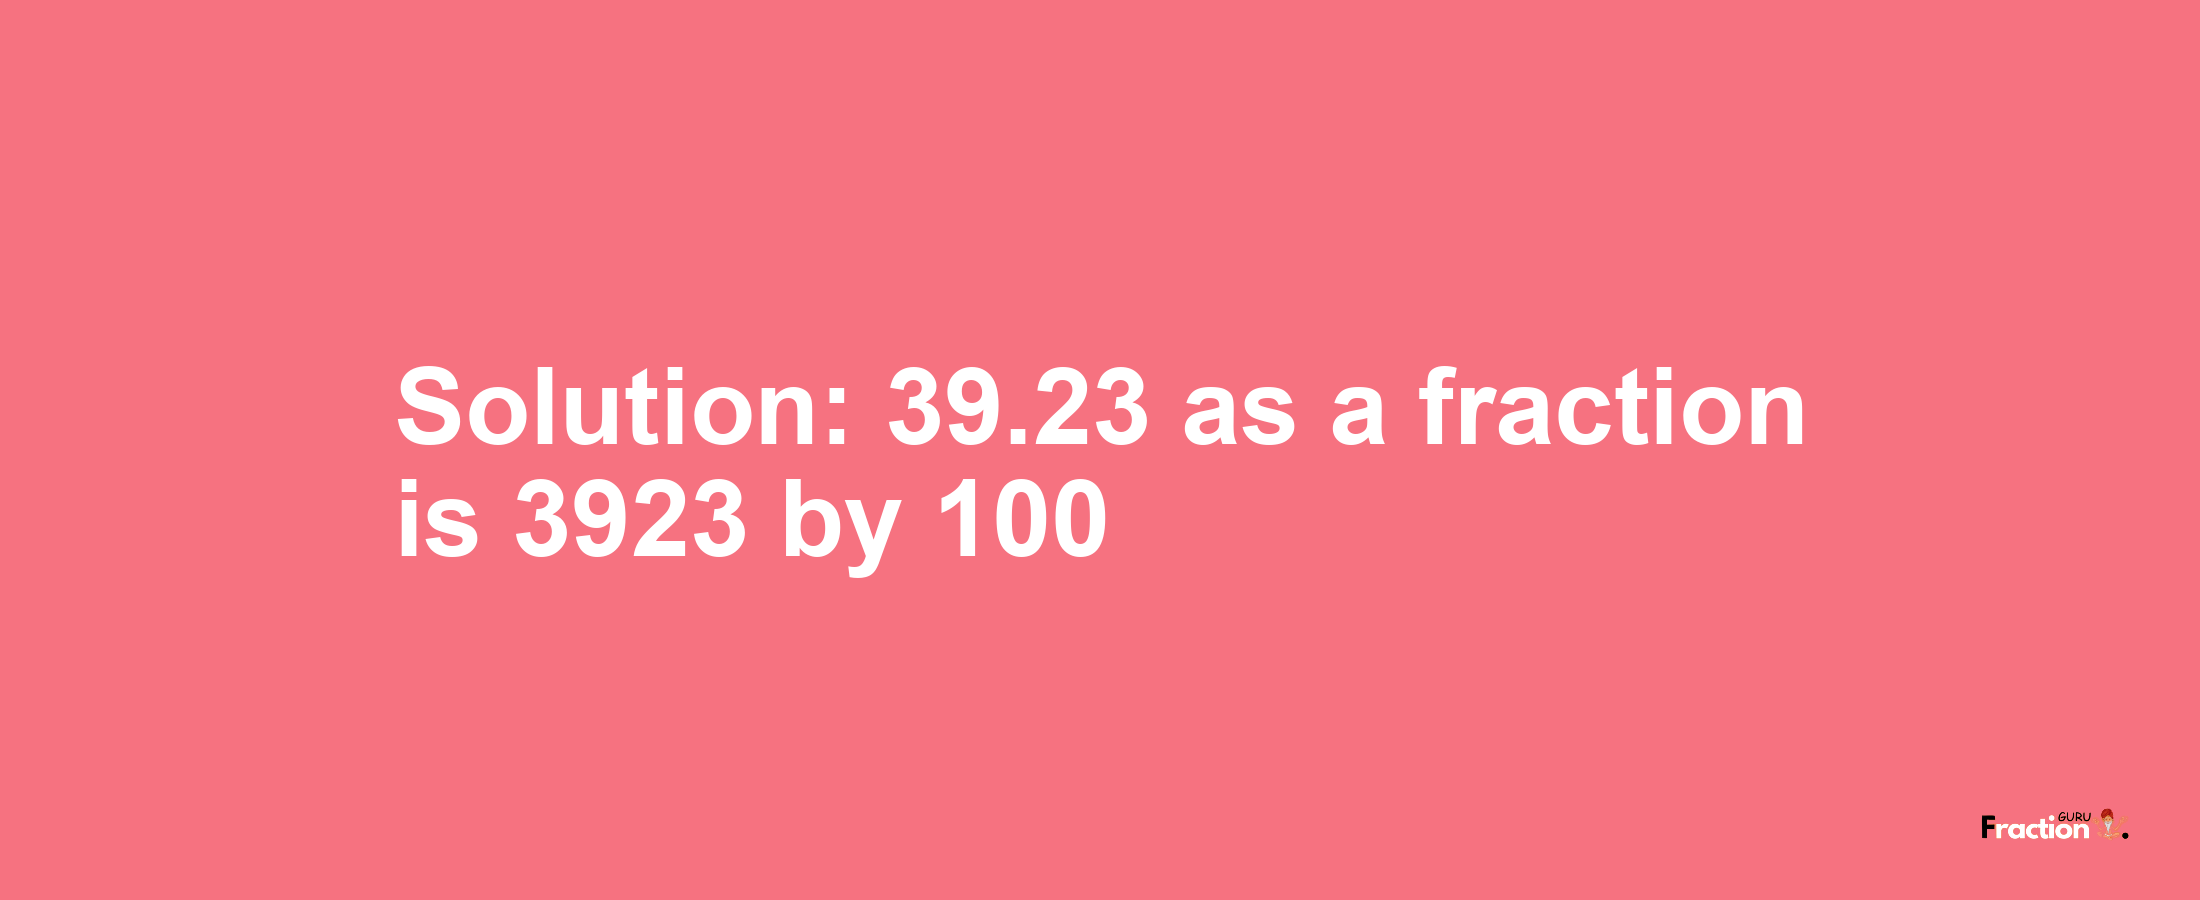 Solution:39.23 as a fraction is 3923/100